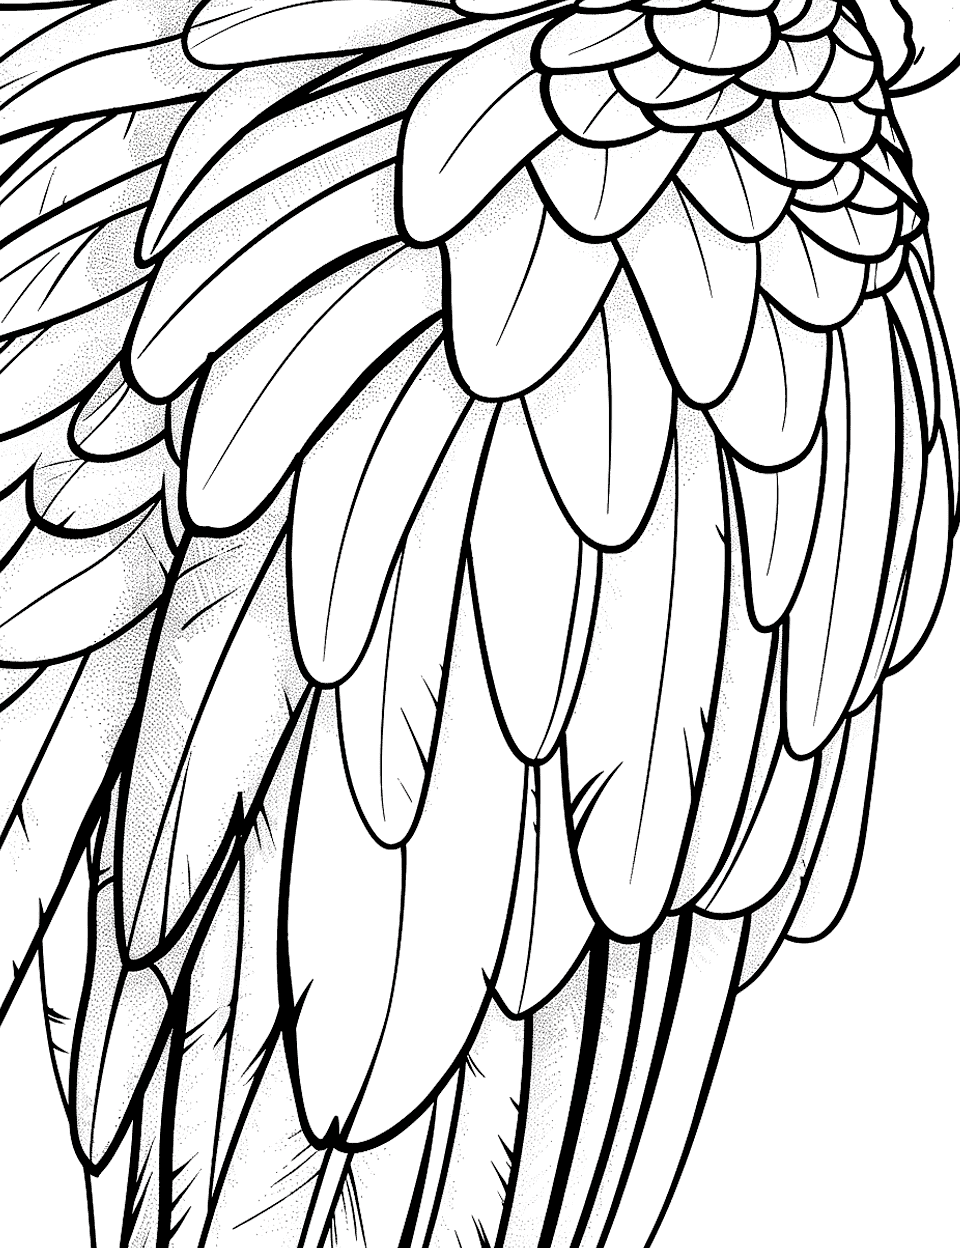 Parrot Feathers Coloring Page - A close-up view of a parrot’s feathers, arranged in a simple pattern.